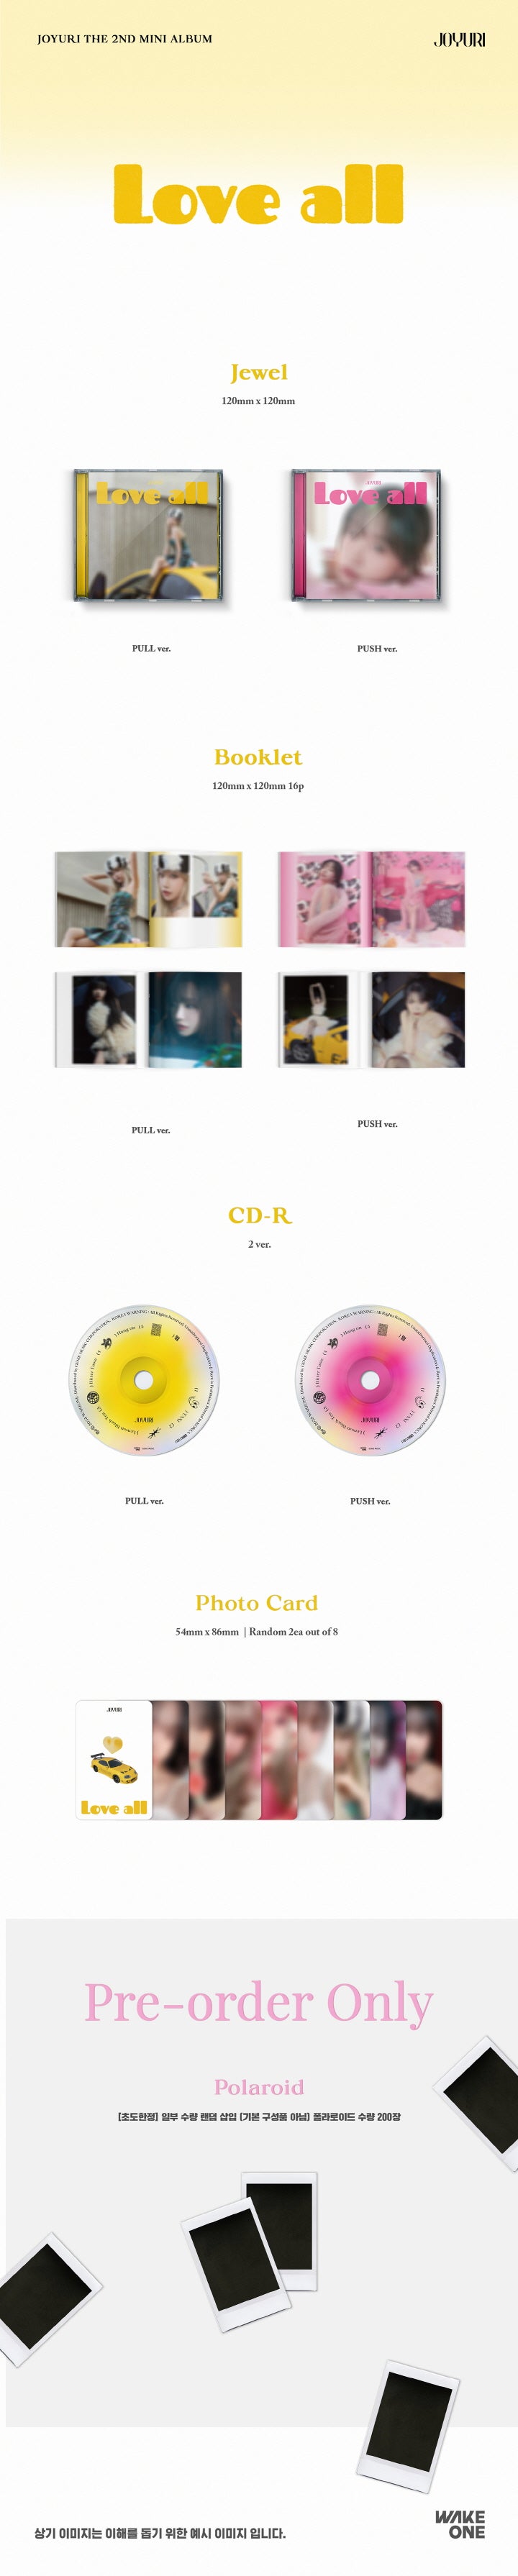 1 CD
1 Booklet (16 pages)
2 Photo Card (random out of 8 types)